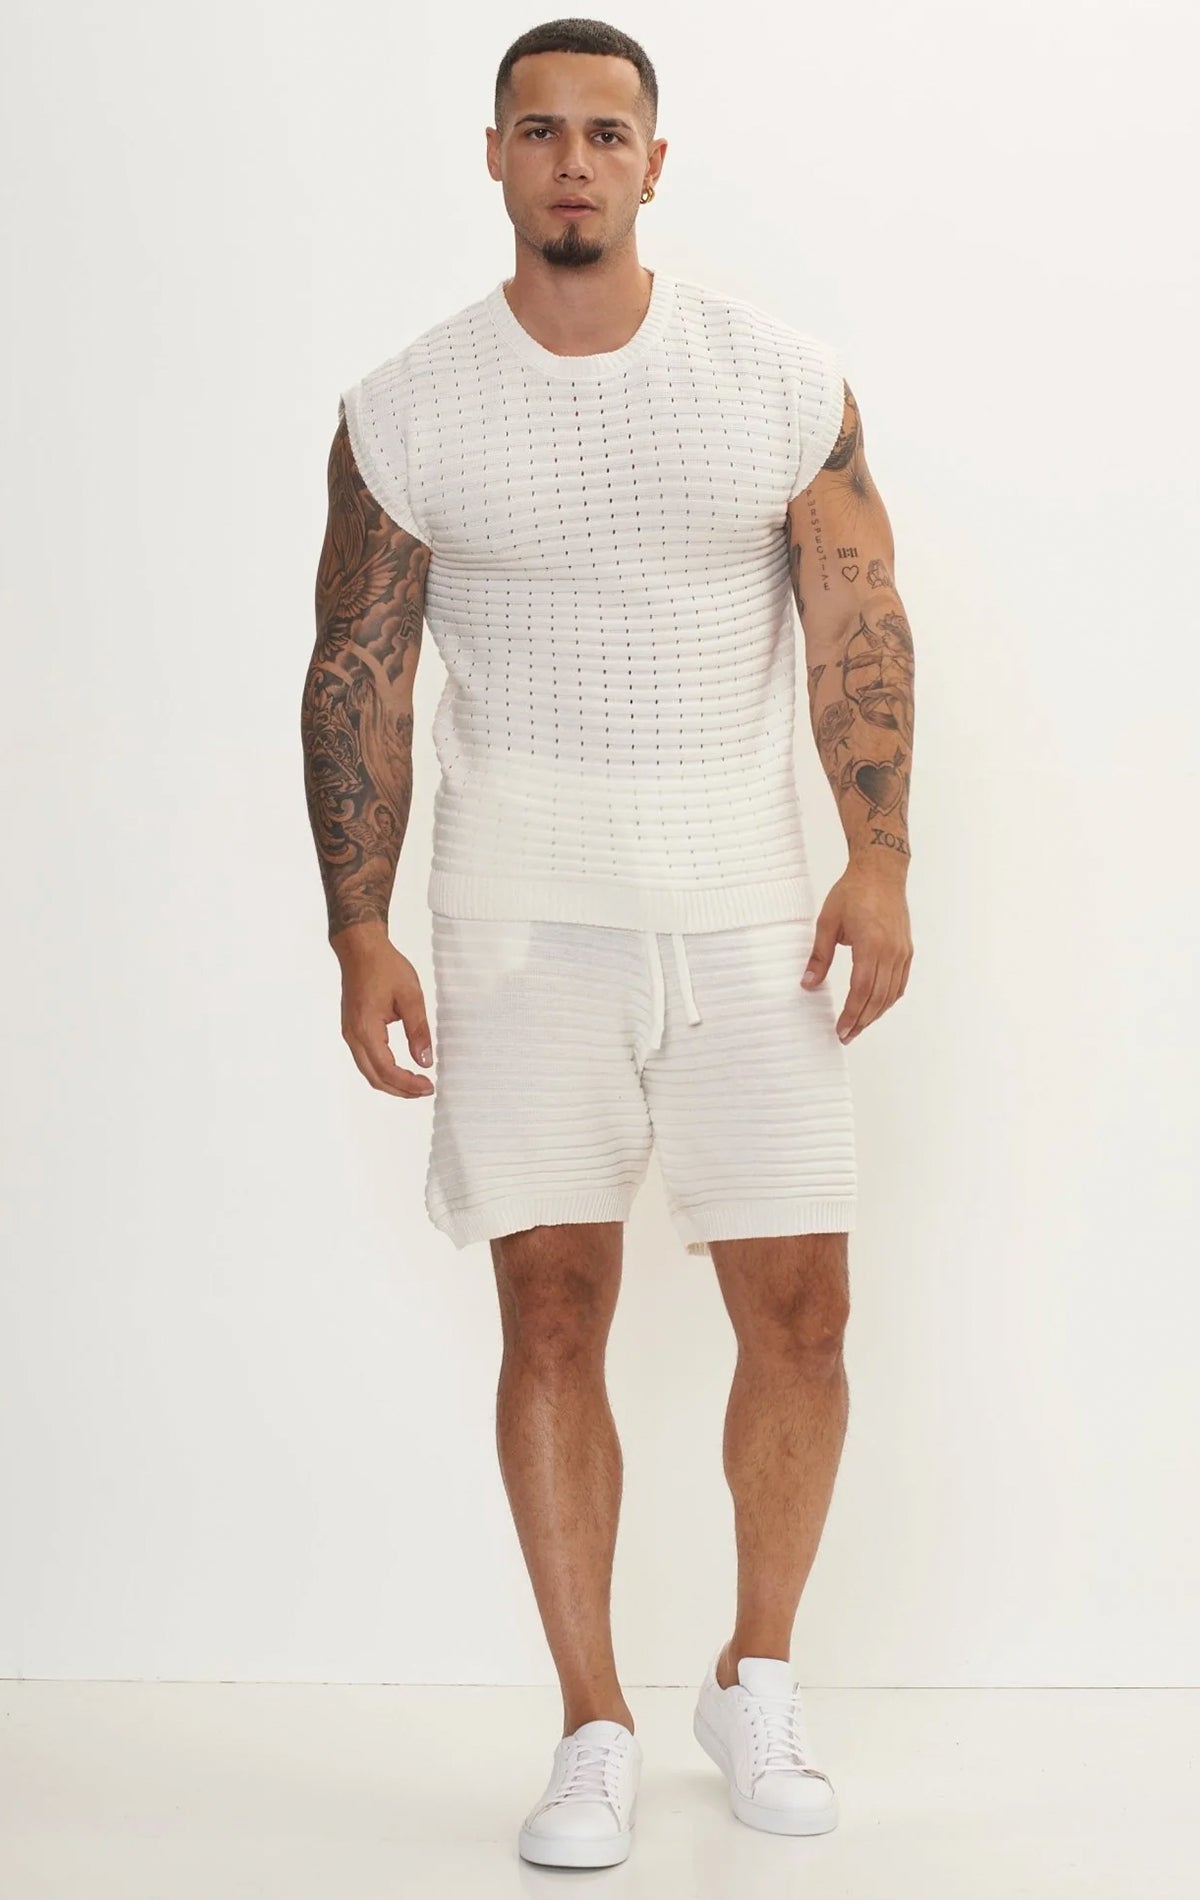 Men's white eyelet short sleeve knit top and shorts set in a variety of colors. The set is made from a soft and breathable knit fabric (50% viscose, 50% polyamide) and features a relaxed-fit top with eyelet detailing on the short sleeves and comfortable shorts with an elastic waistband.